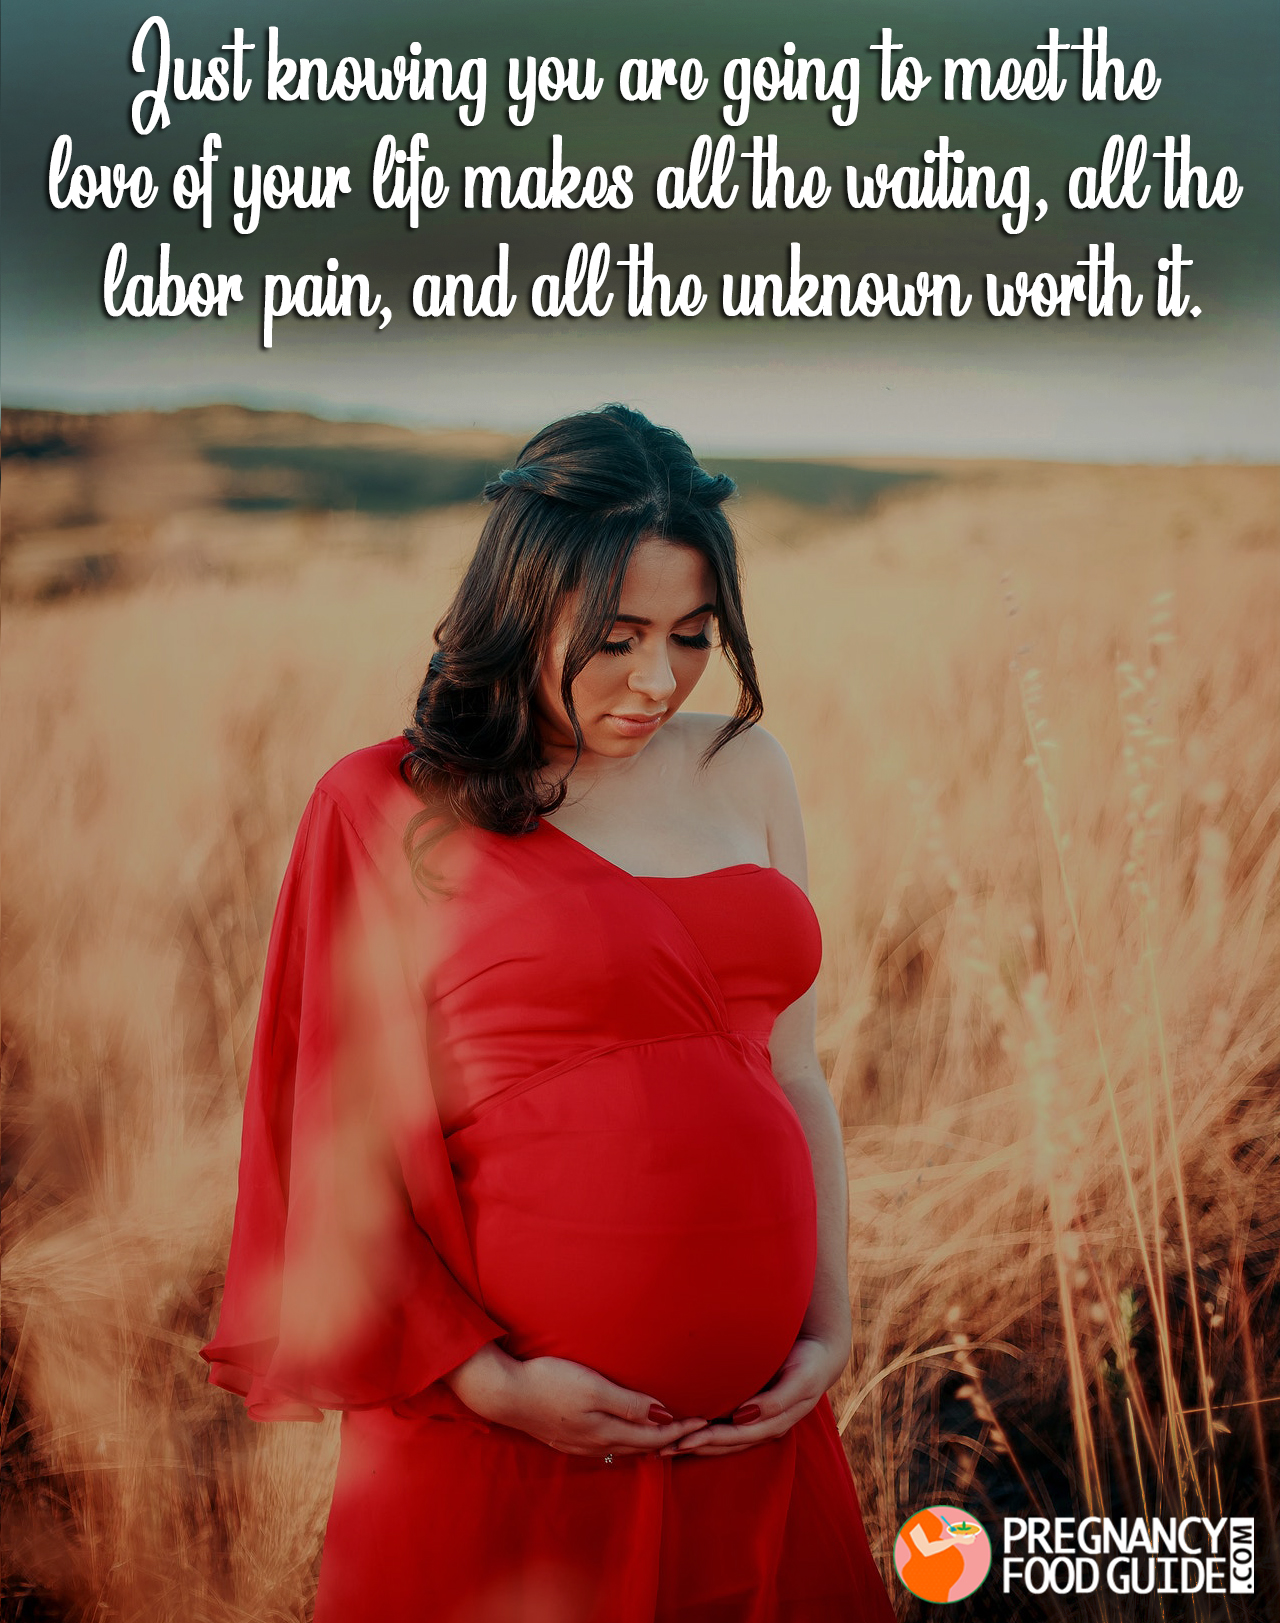 Pregnant wife quotes for love 40 Beautiful